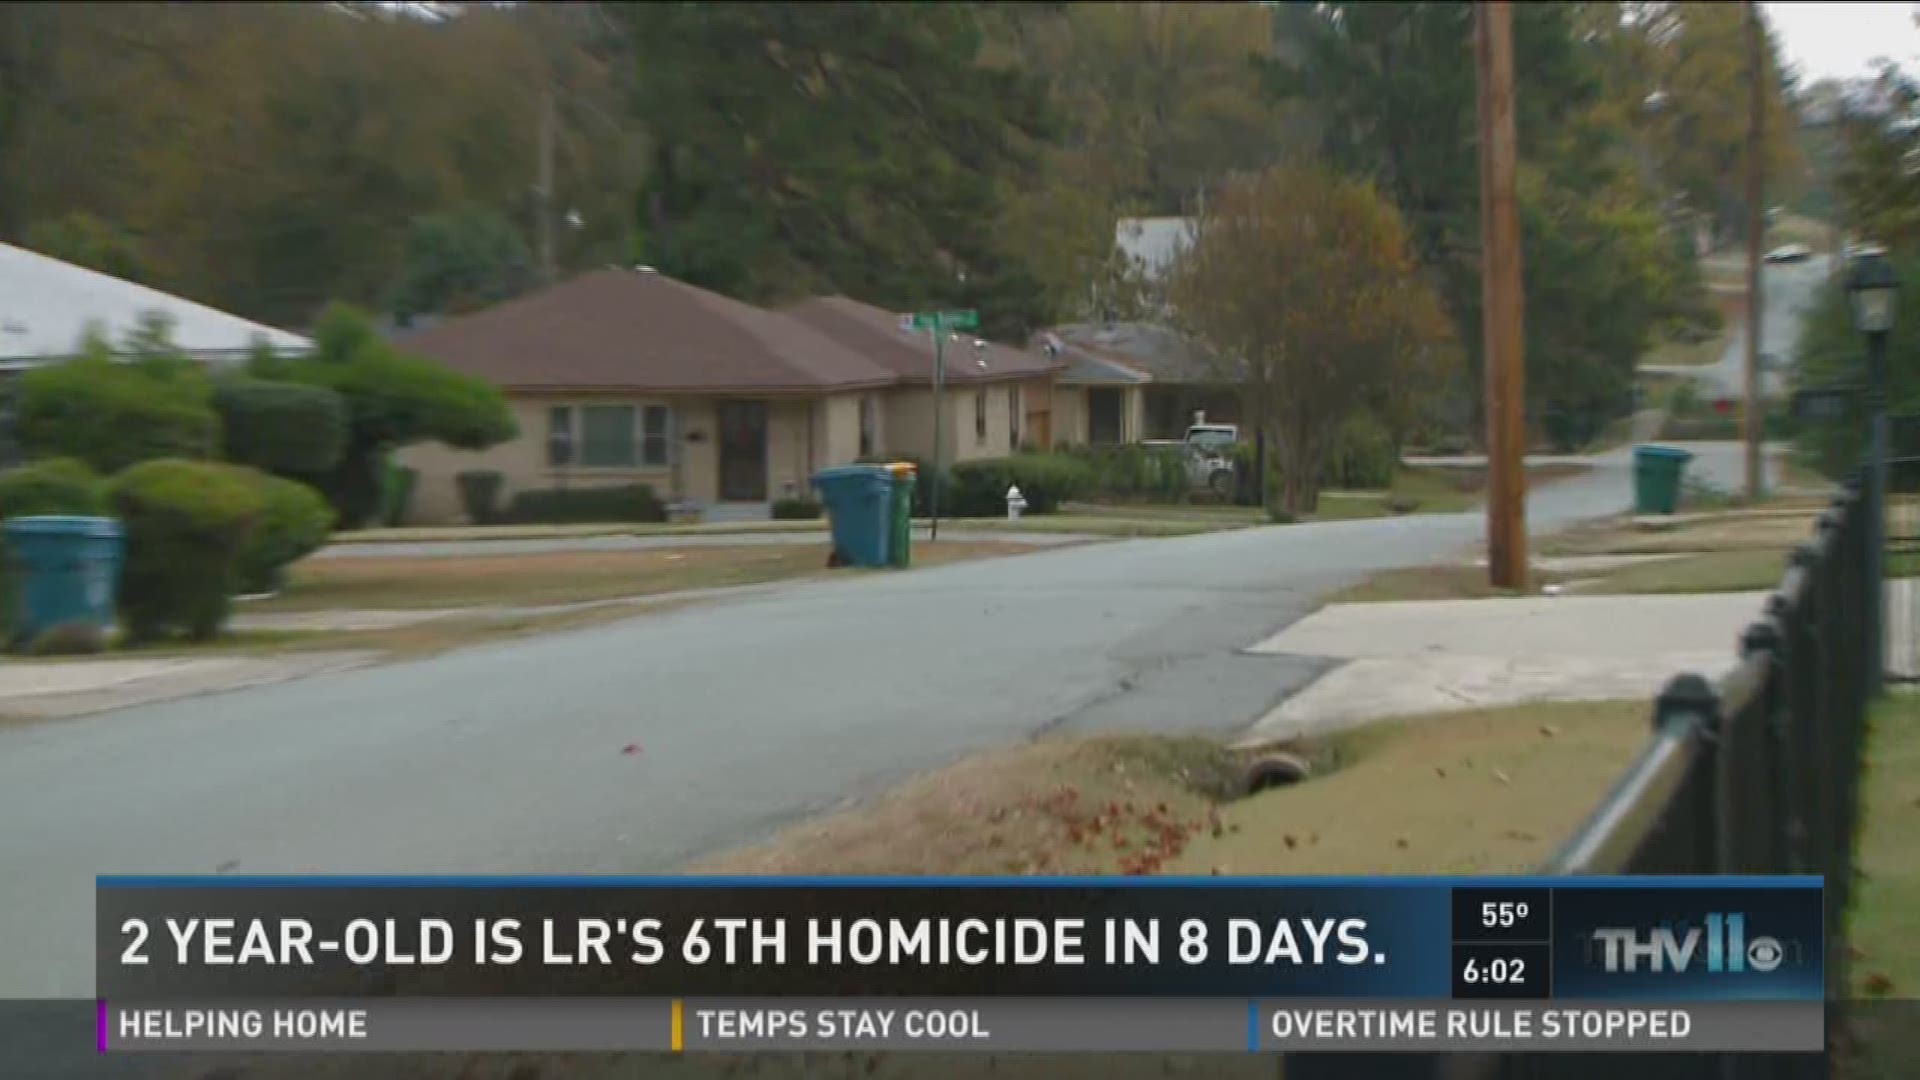 Murder of 2-year-old is LR's 6th homicide in 8 days